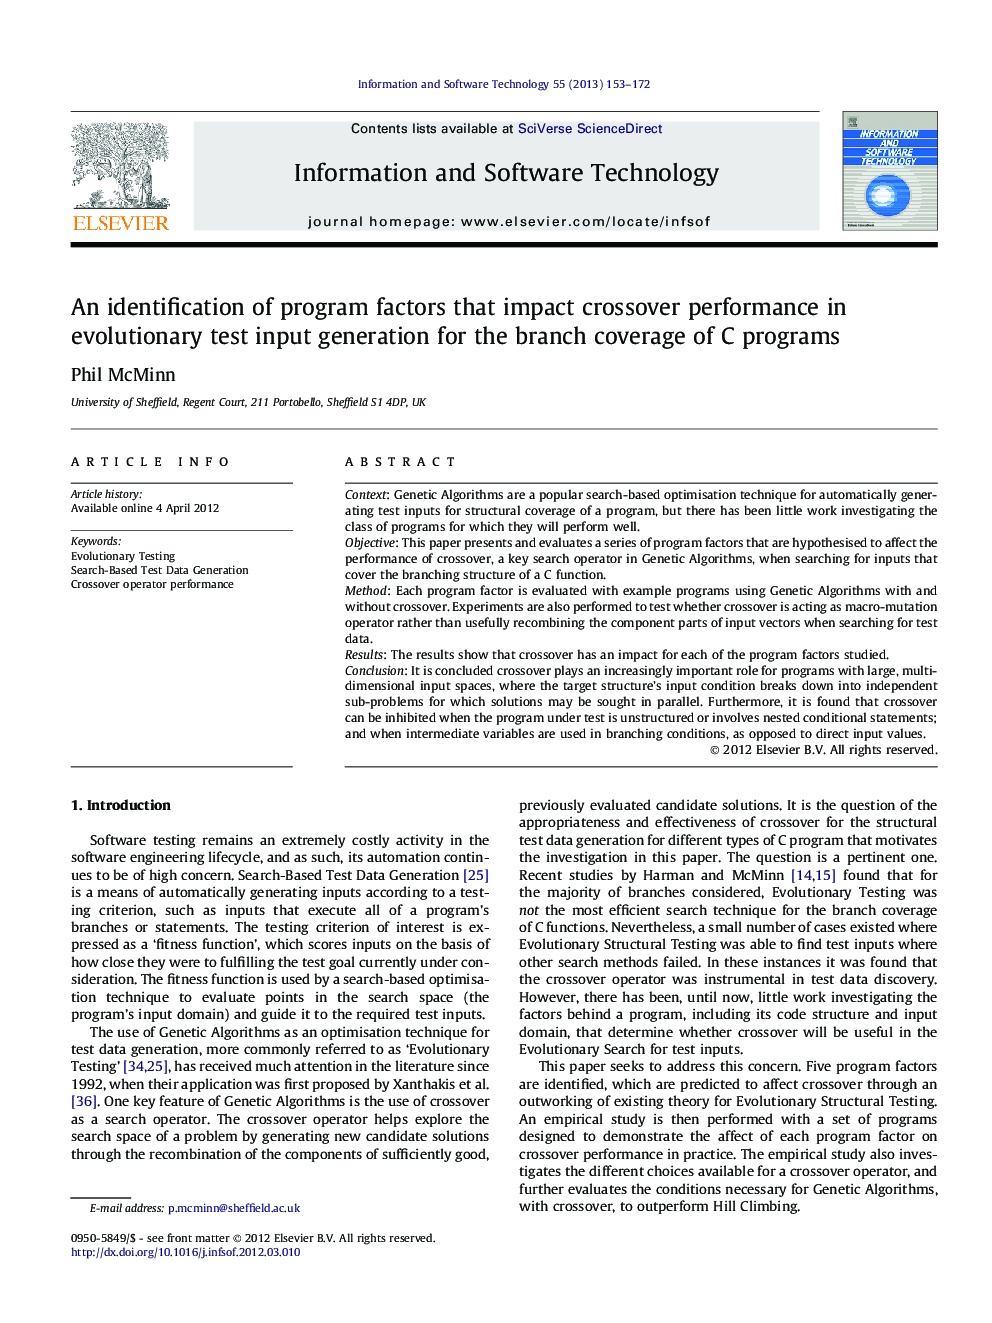 An identification of program factors that impact crossover performance in evolutionary test input generation for the branch coverage of C programs